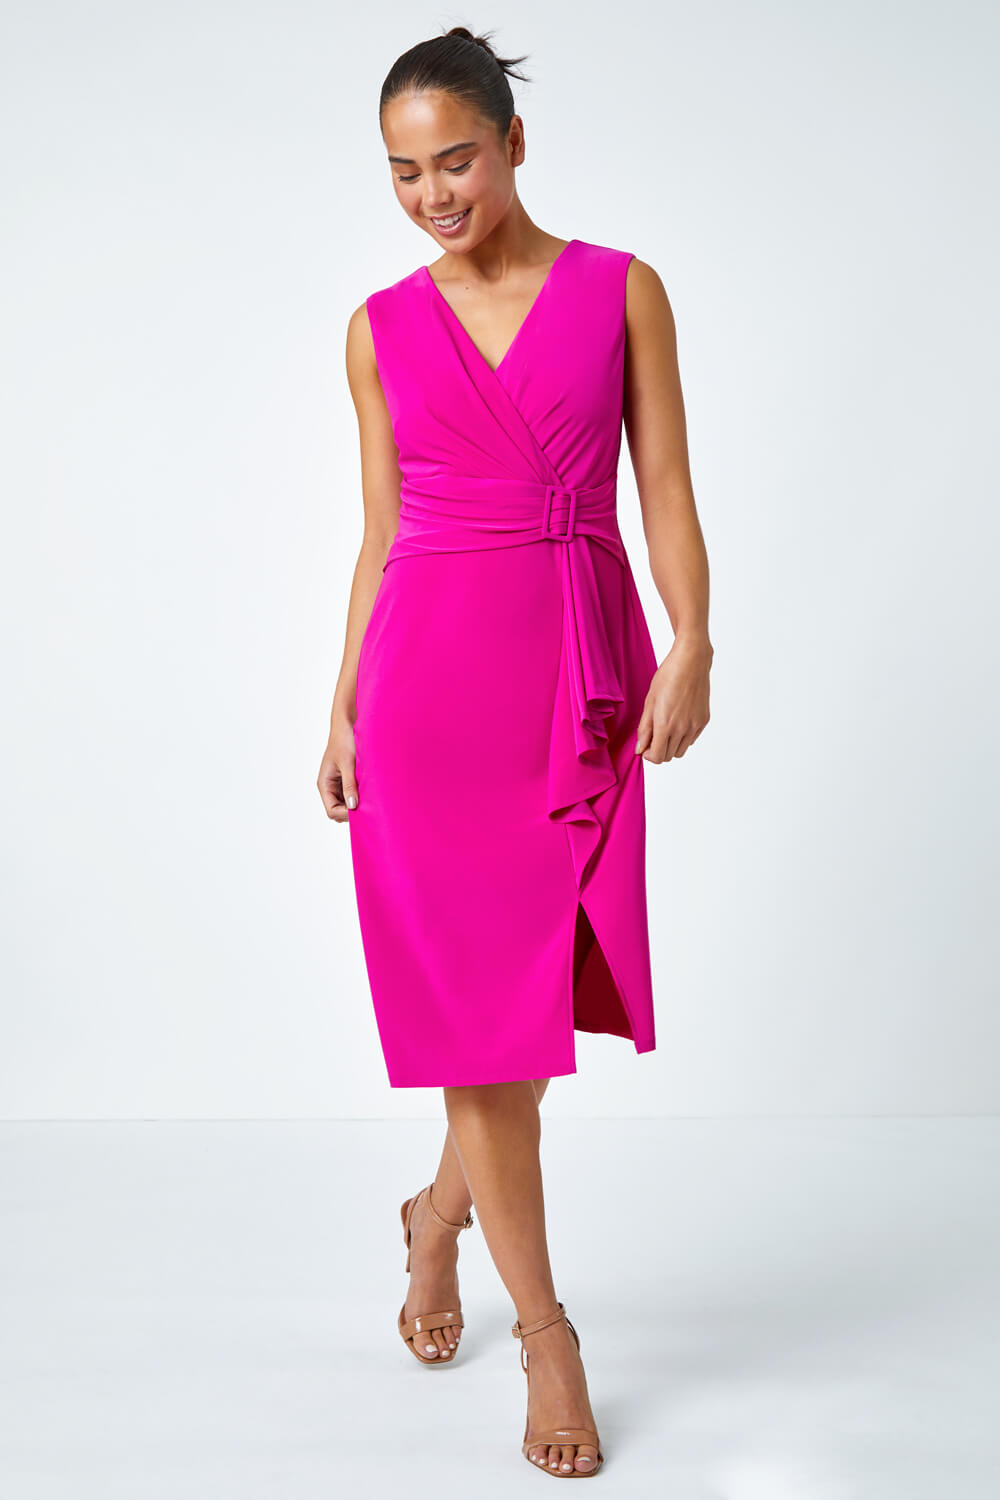 PINK Petite Buckle Waterfall Stretch Dress, Image 5 of 6